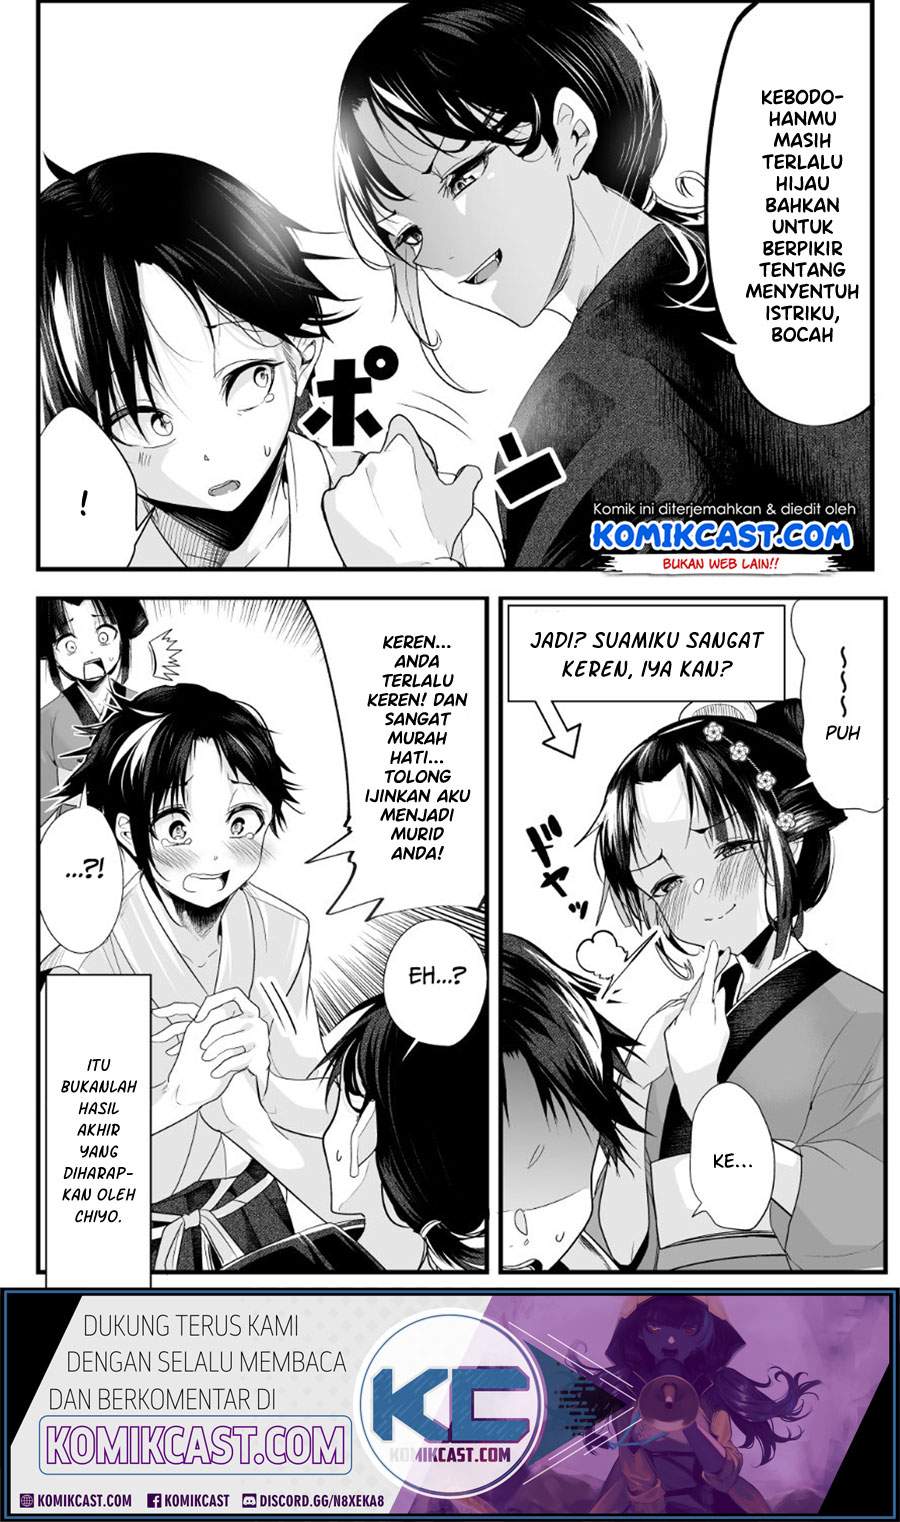 My New Wife Is Forcing Herself to Smile Chapter 18 Bahasa Indonesia